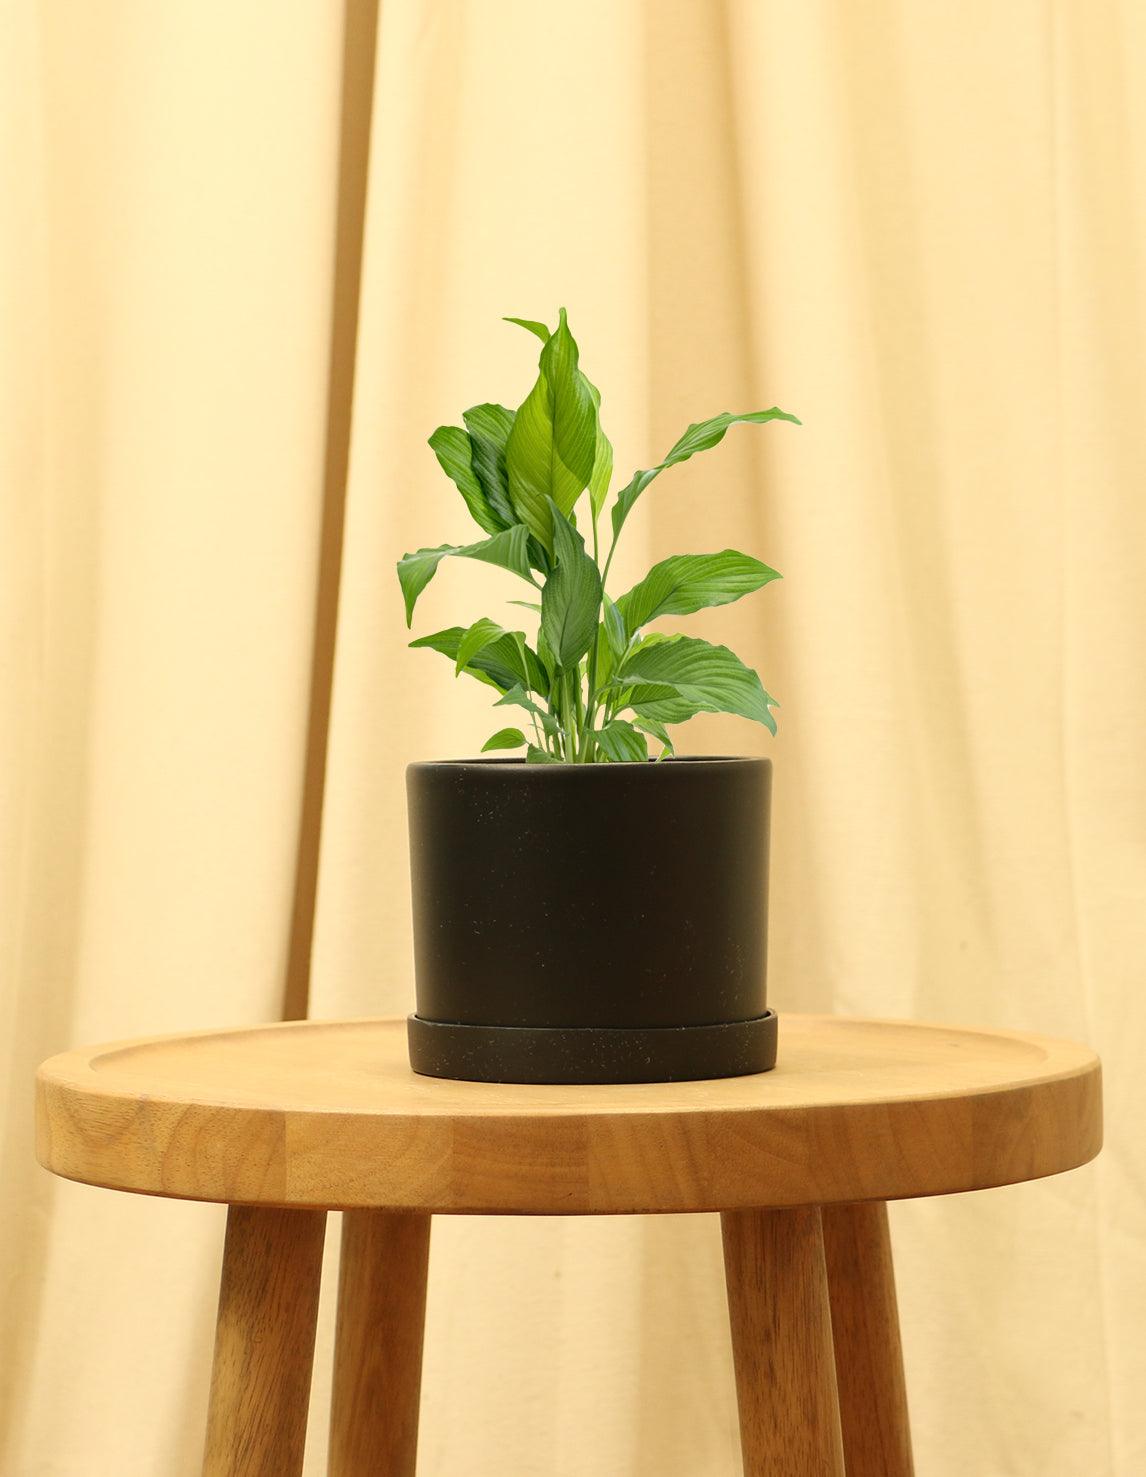 Small Peace Lily in black pot.